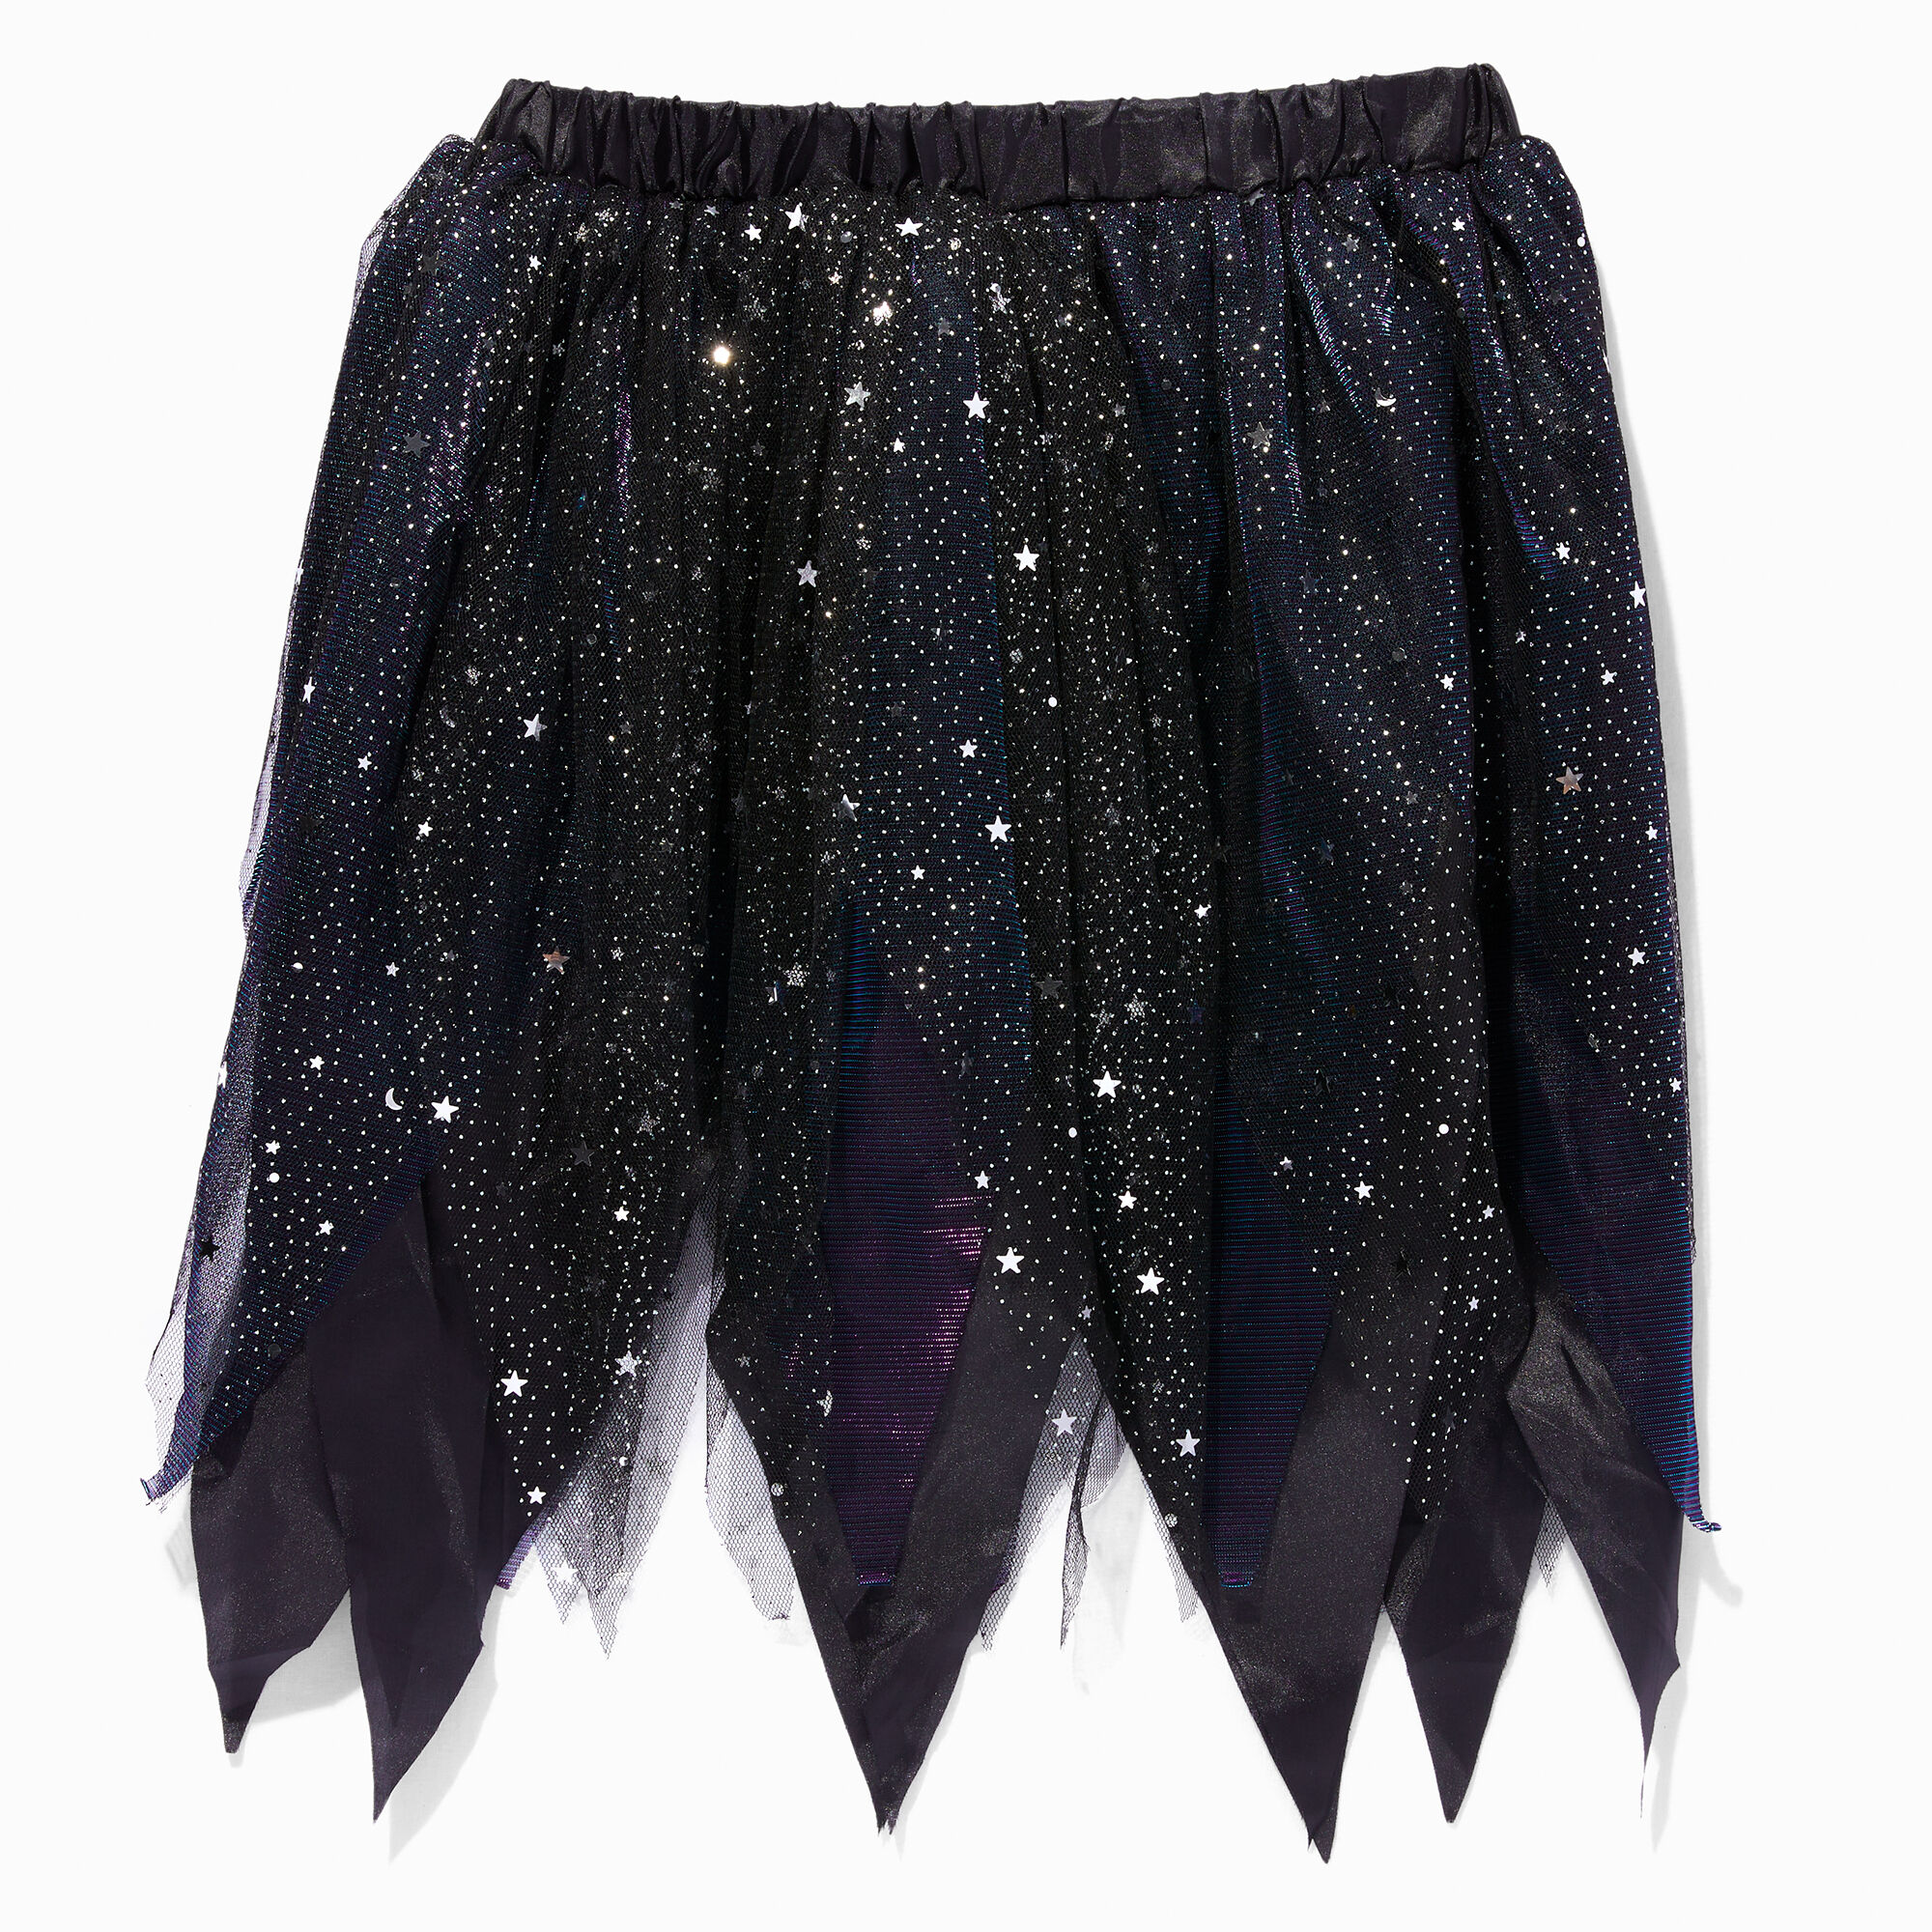 View Claires Celestial Witch Tutu information